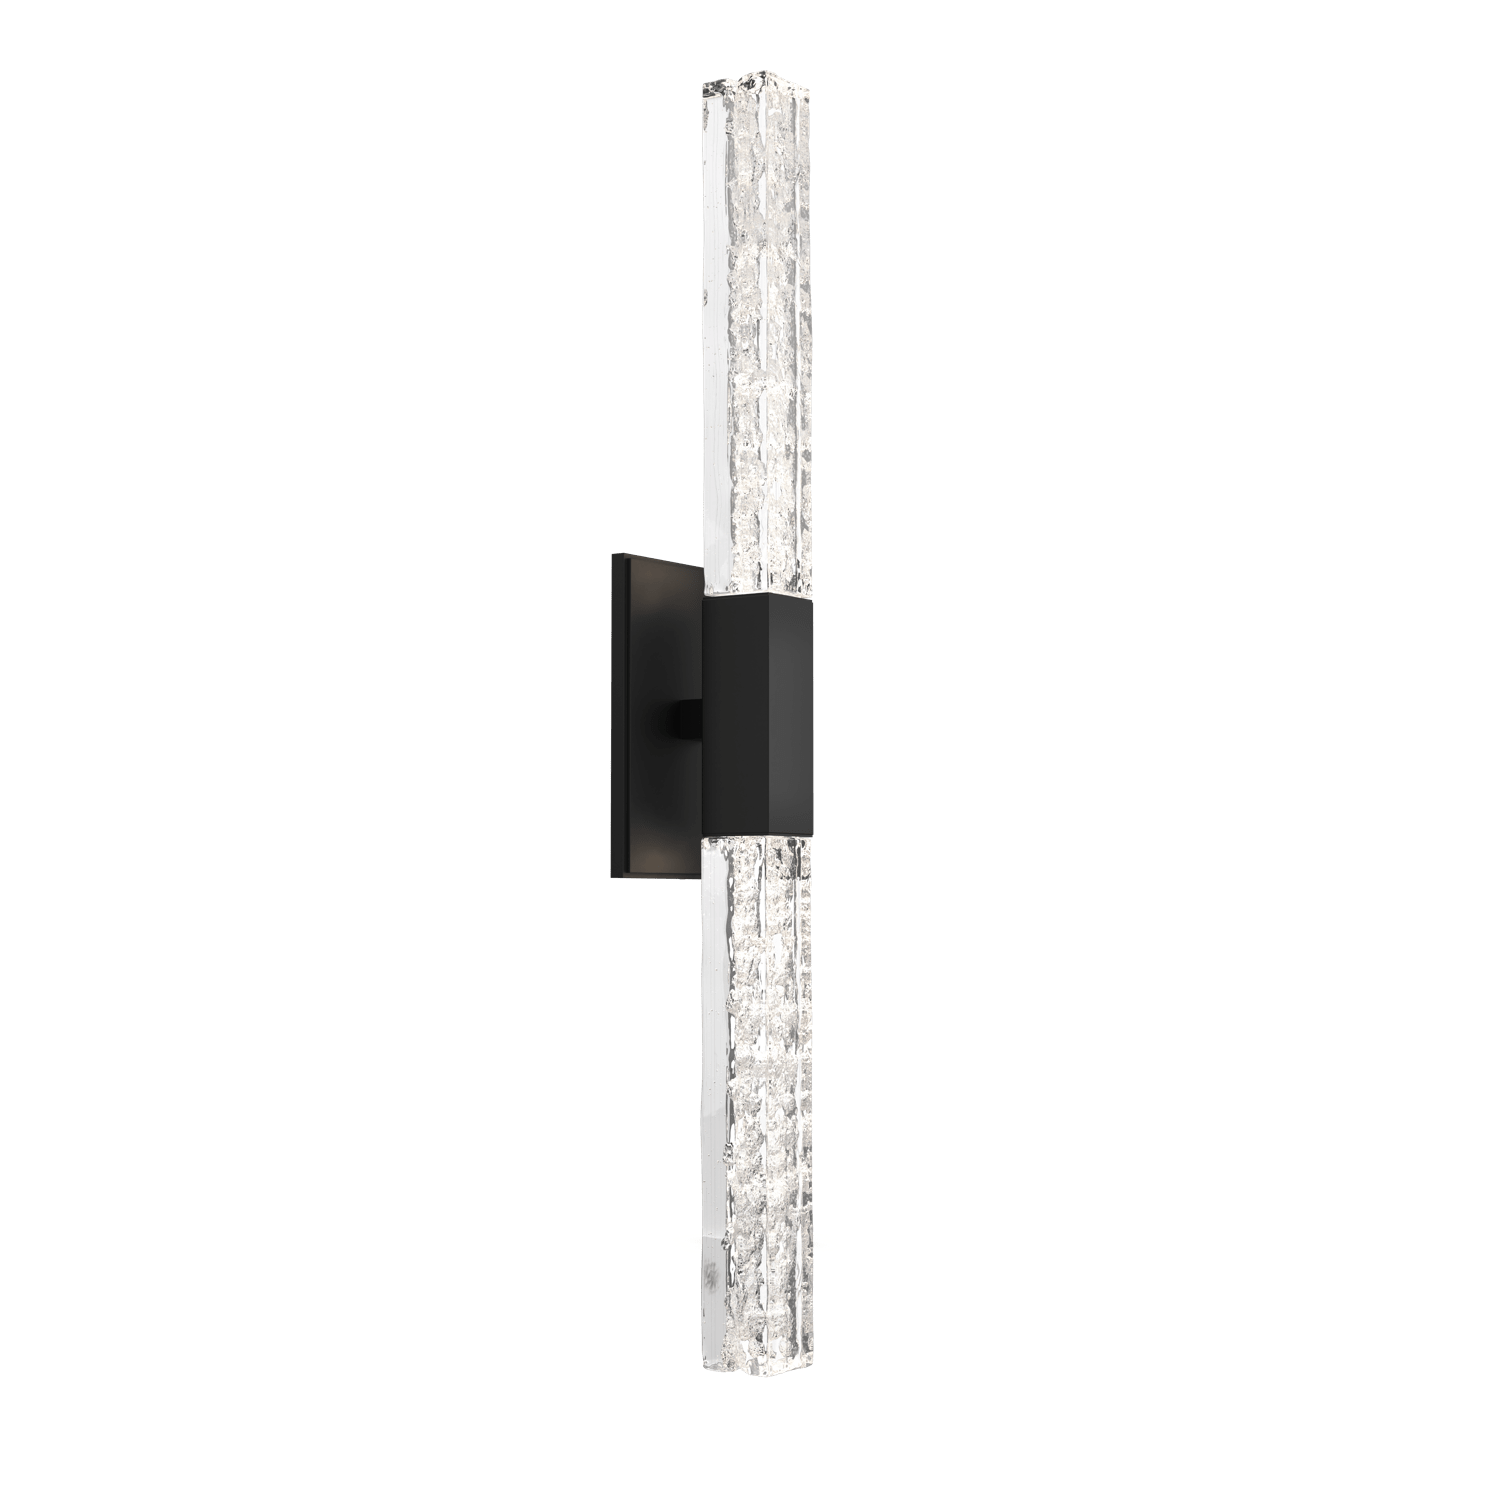 IDB0060-02-MB-GC-Hammerton-Studio-Axis-Double-Wall-Sconce-with-Matte-Black-finish-and-clear-cast-glass-and-LED-lamping